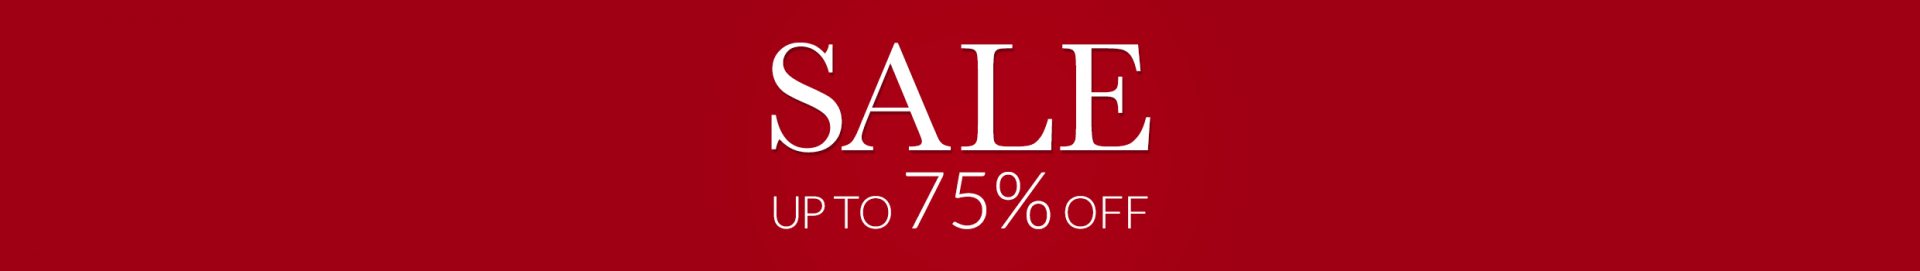 Sale Up to 75% Off